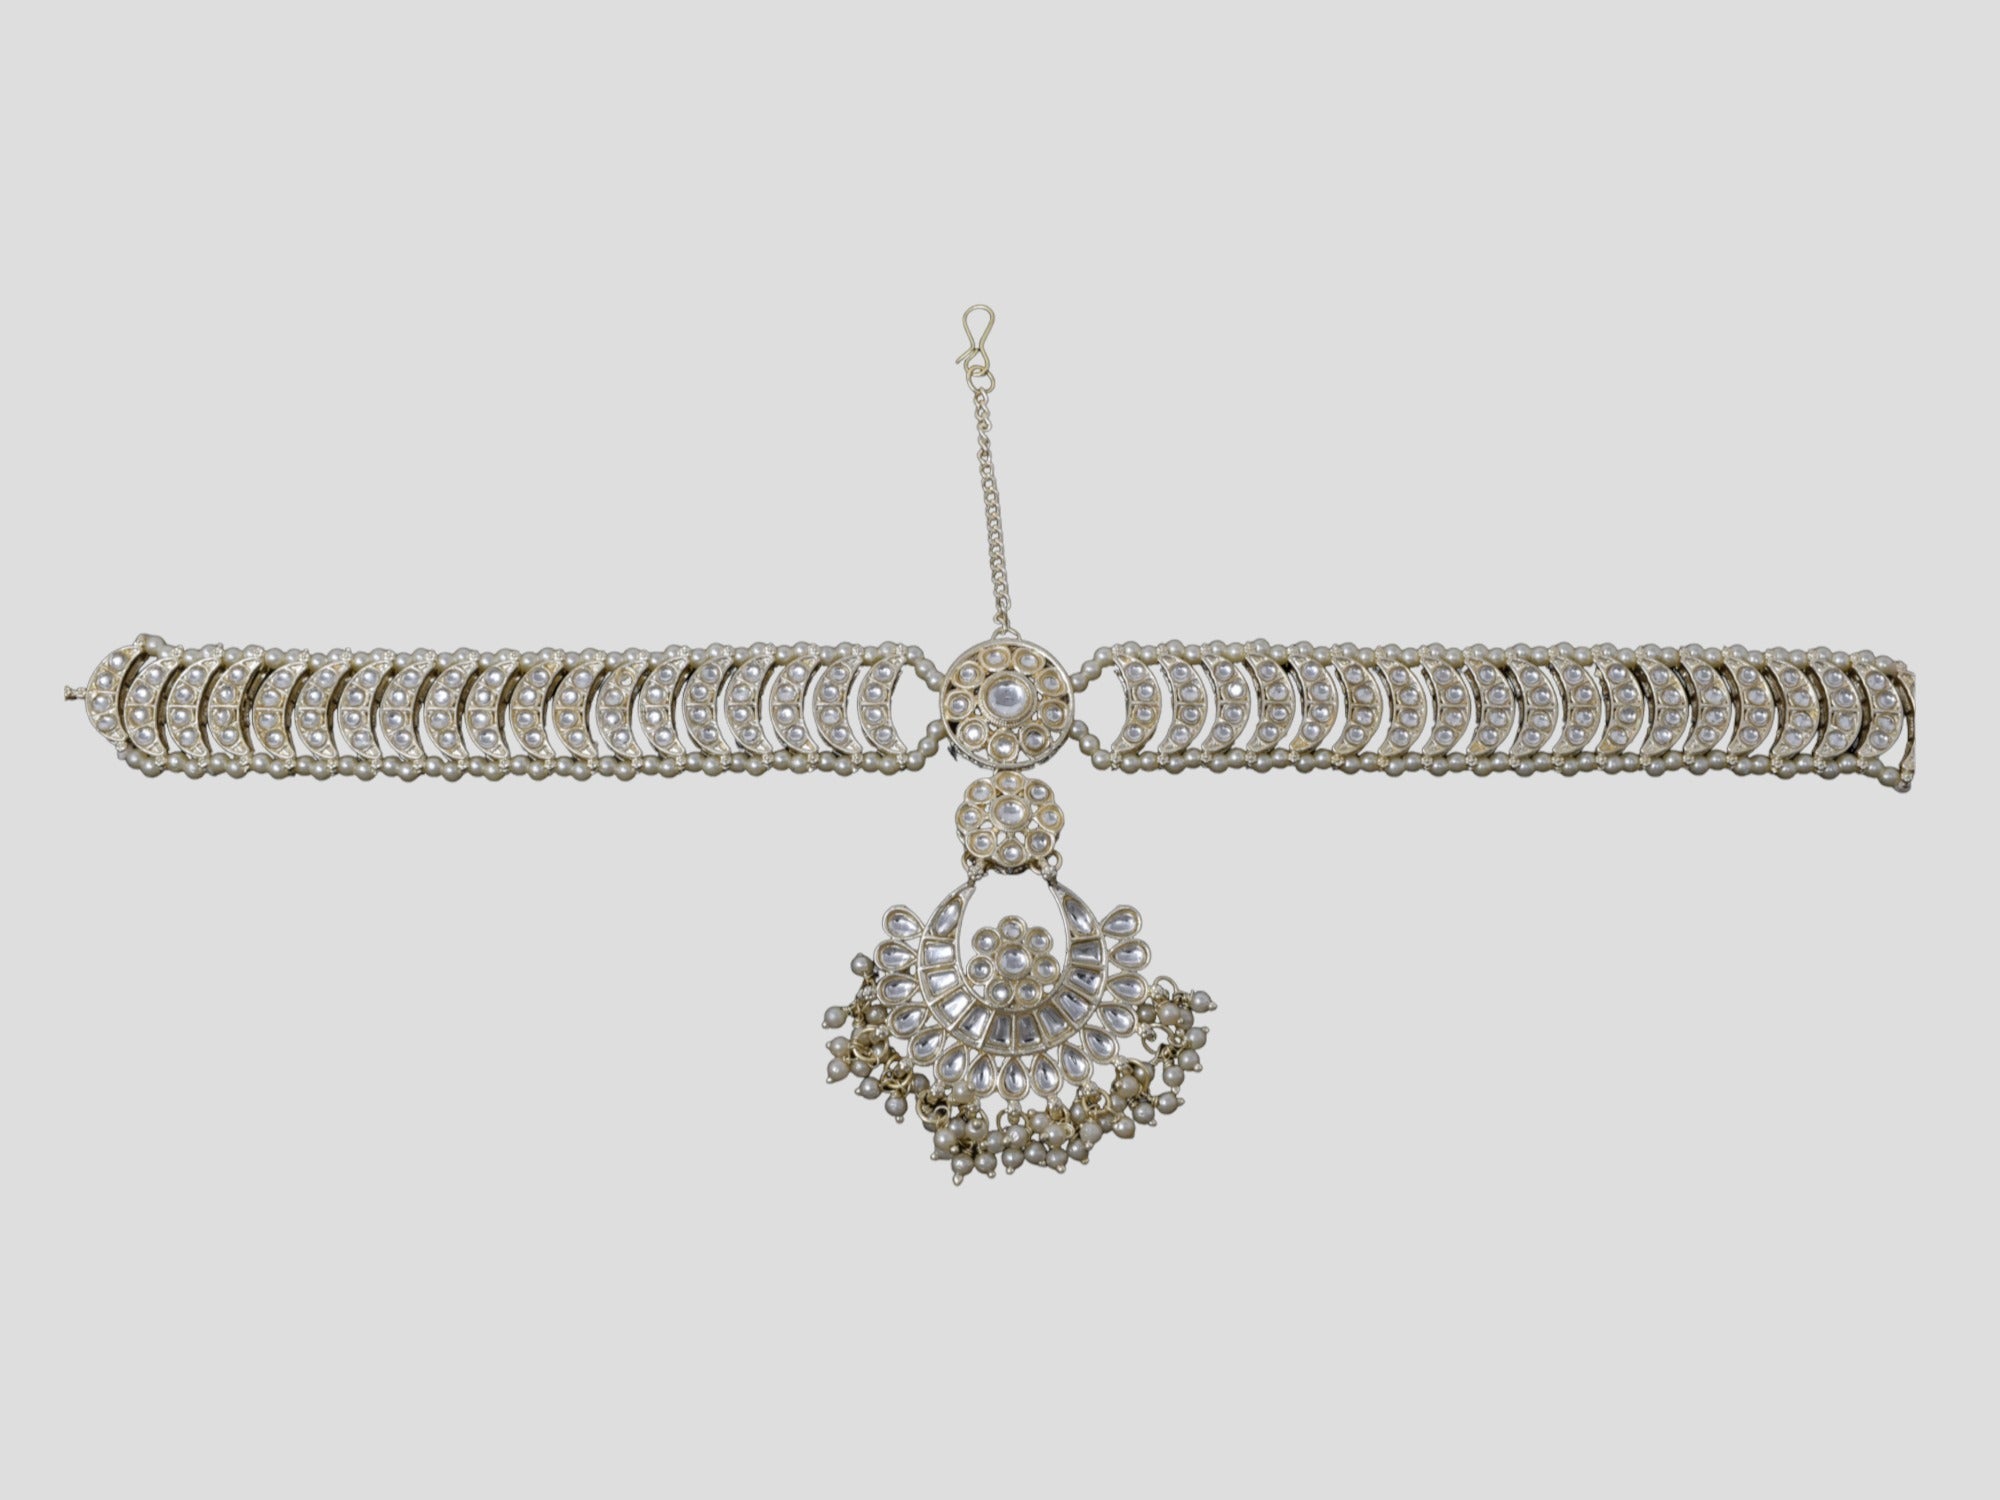 Rajasthani Mathapatti: Traditional Gold & Silver Forehead Ornament with Gemstones